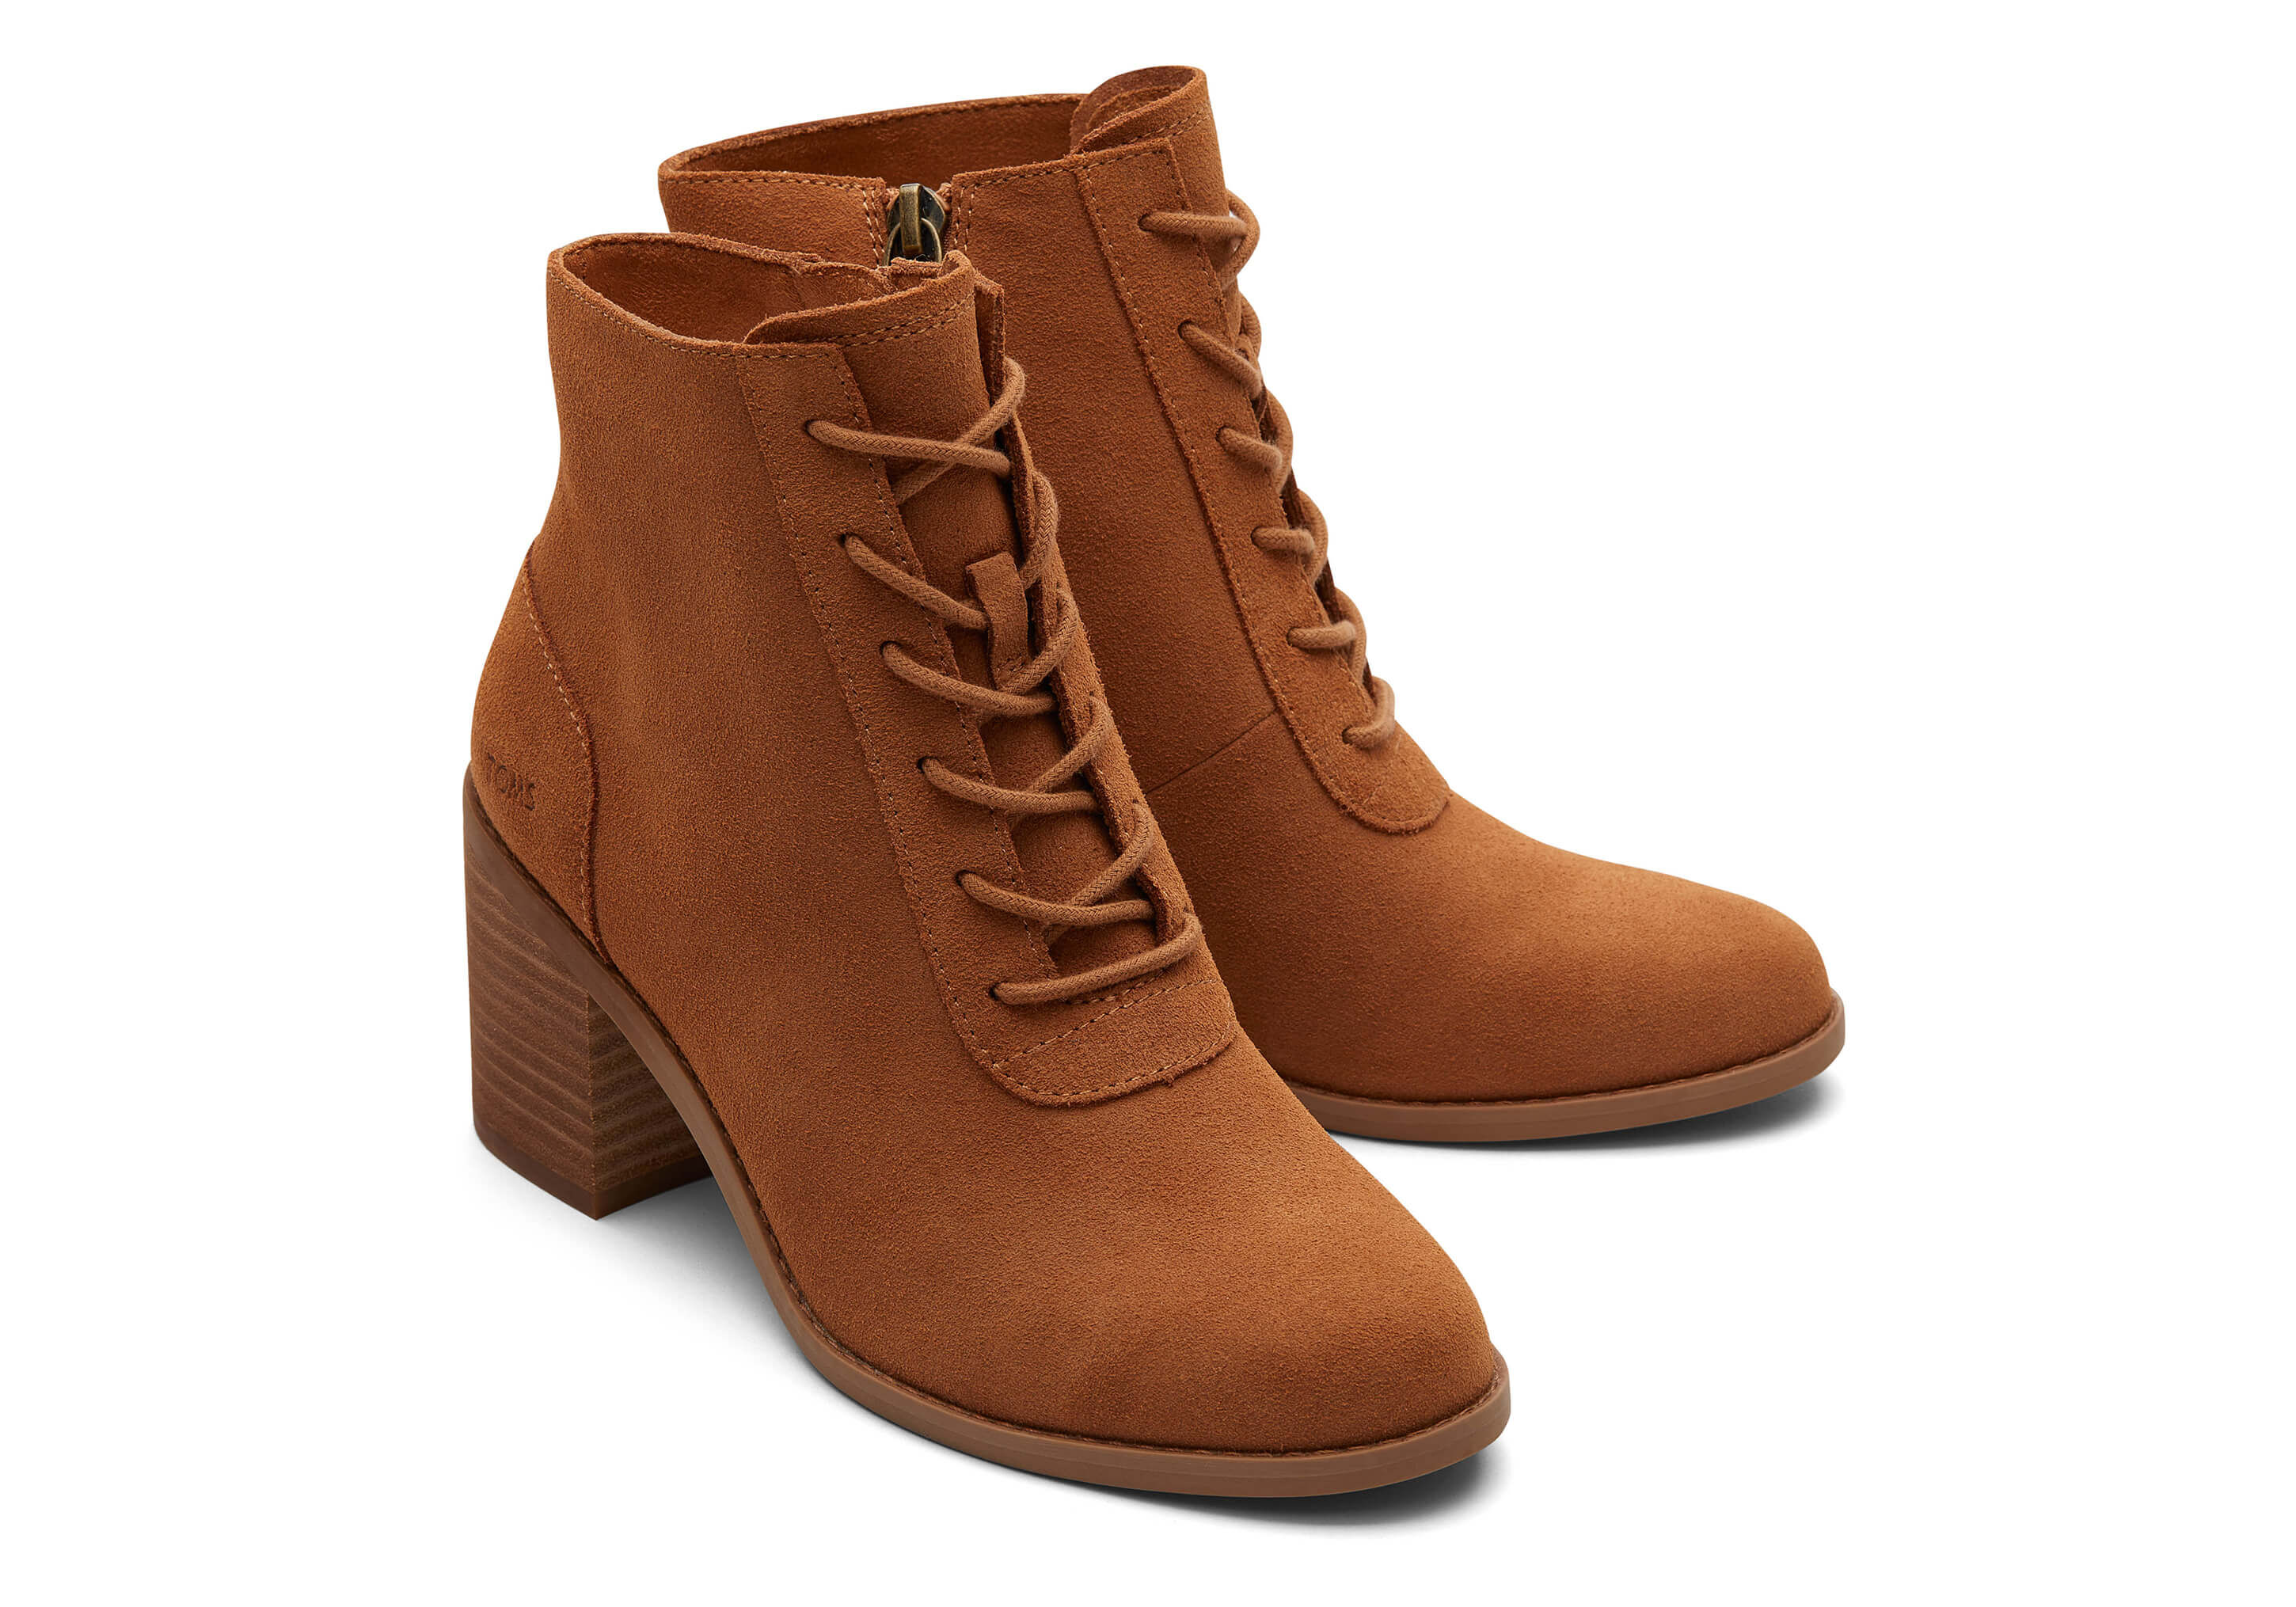 Women Fashion Casual Vintage Retro Mid-Calf Boots Lace Up Thick Heels Shoes  - Walmart.com